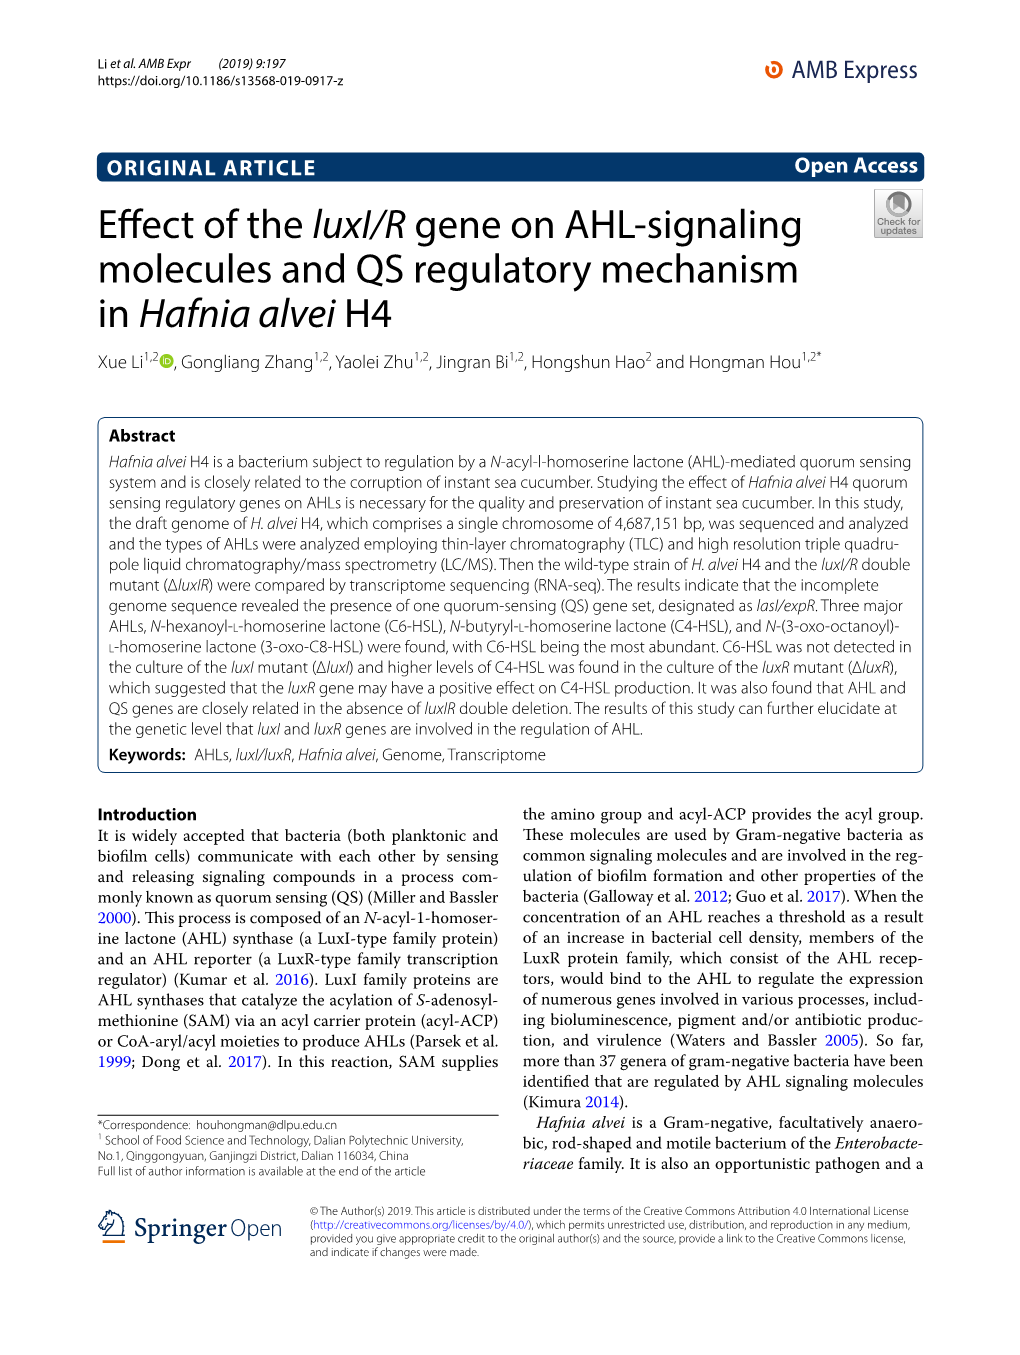 Effect of the Luxi/R Gene on AHL-Signaling Molecules and QS